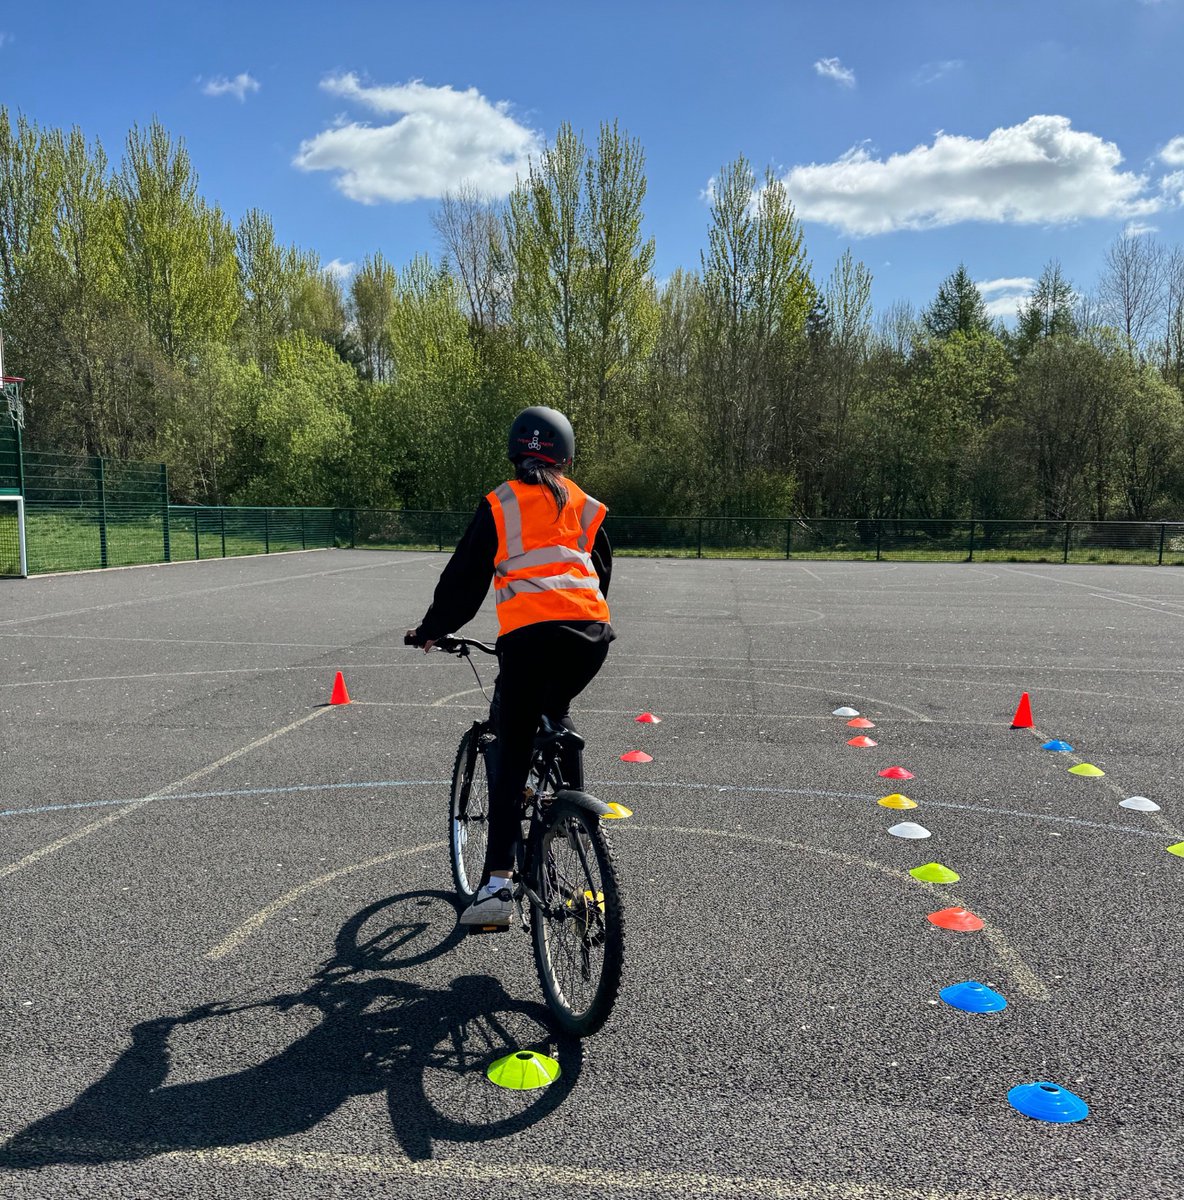 P5, P6 and P7 can bring in their bikes next Tuesday (30 April). At lunch time we will complete some bike skill drills to improve their ability to cycle confidently and safely. We have a limited number of helmets if your child does not have one themselves. 😊🚴‍♀️